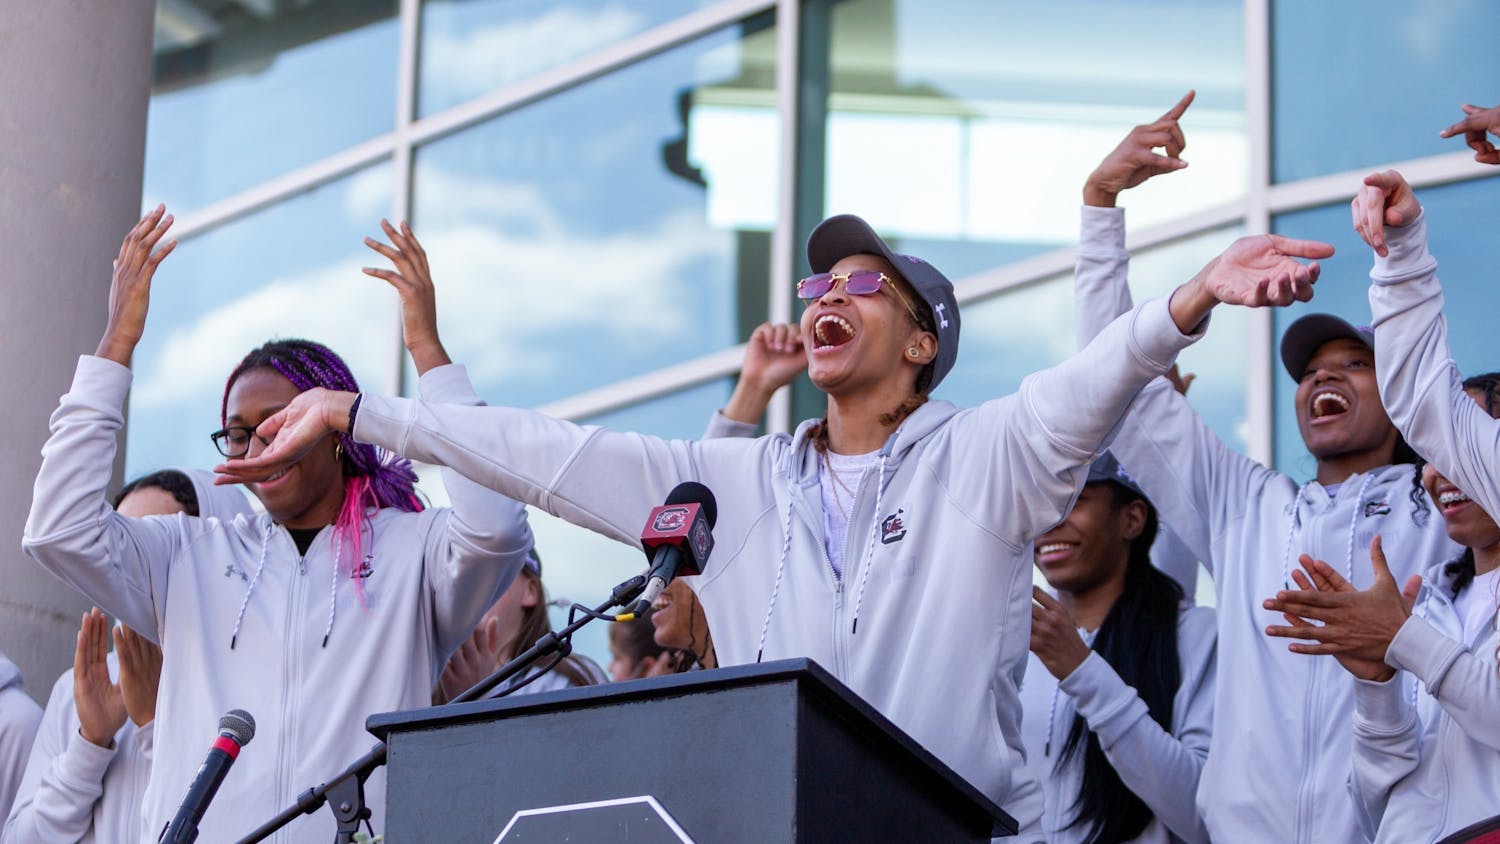 Members of the South Carolina women's basketball team celebrate outside of Colonial Life Arena on April 4, 2022. The Gamecocks defeated University of Connecticut 64-49 to claim their second national title.